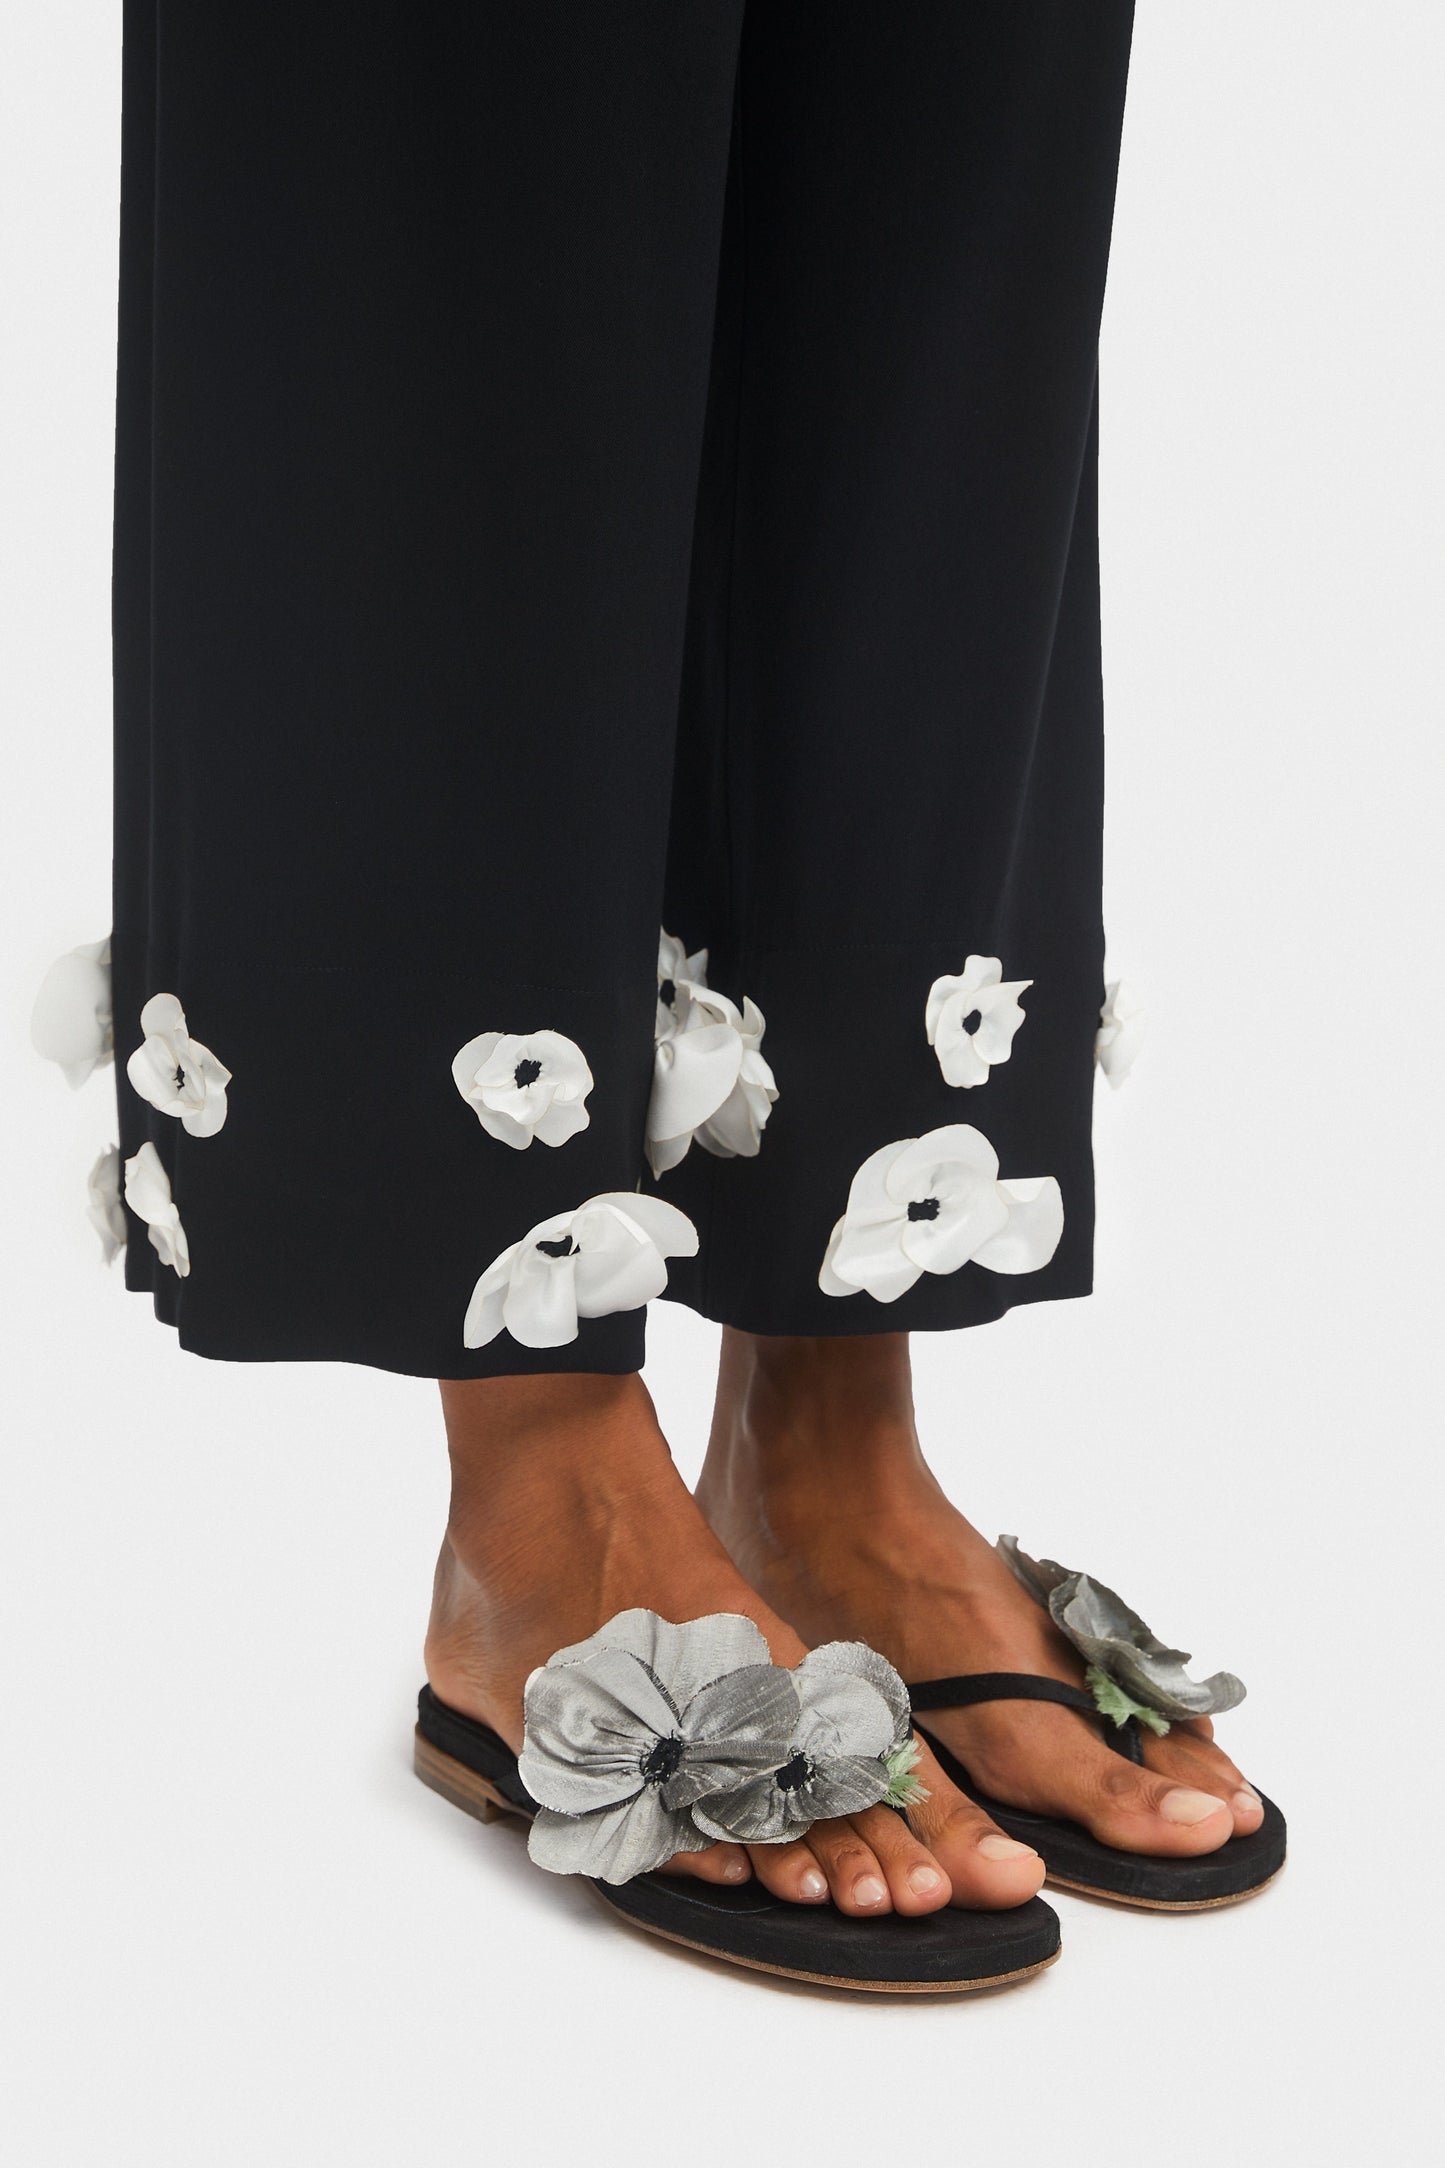 Poppies Silk Slides in Black and Grey